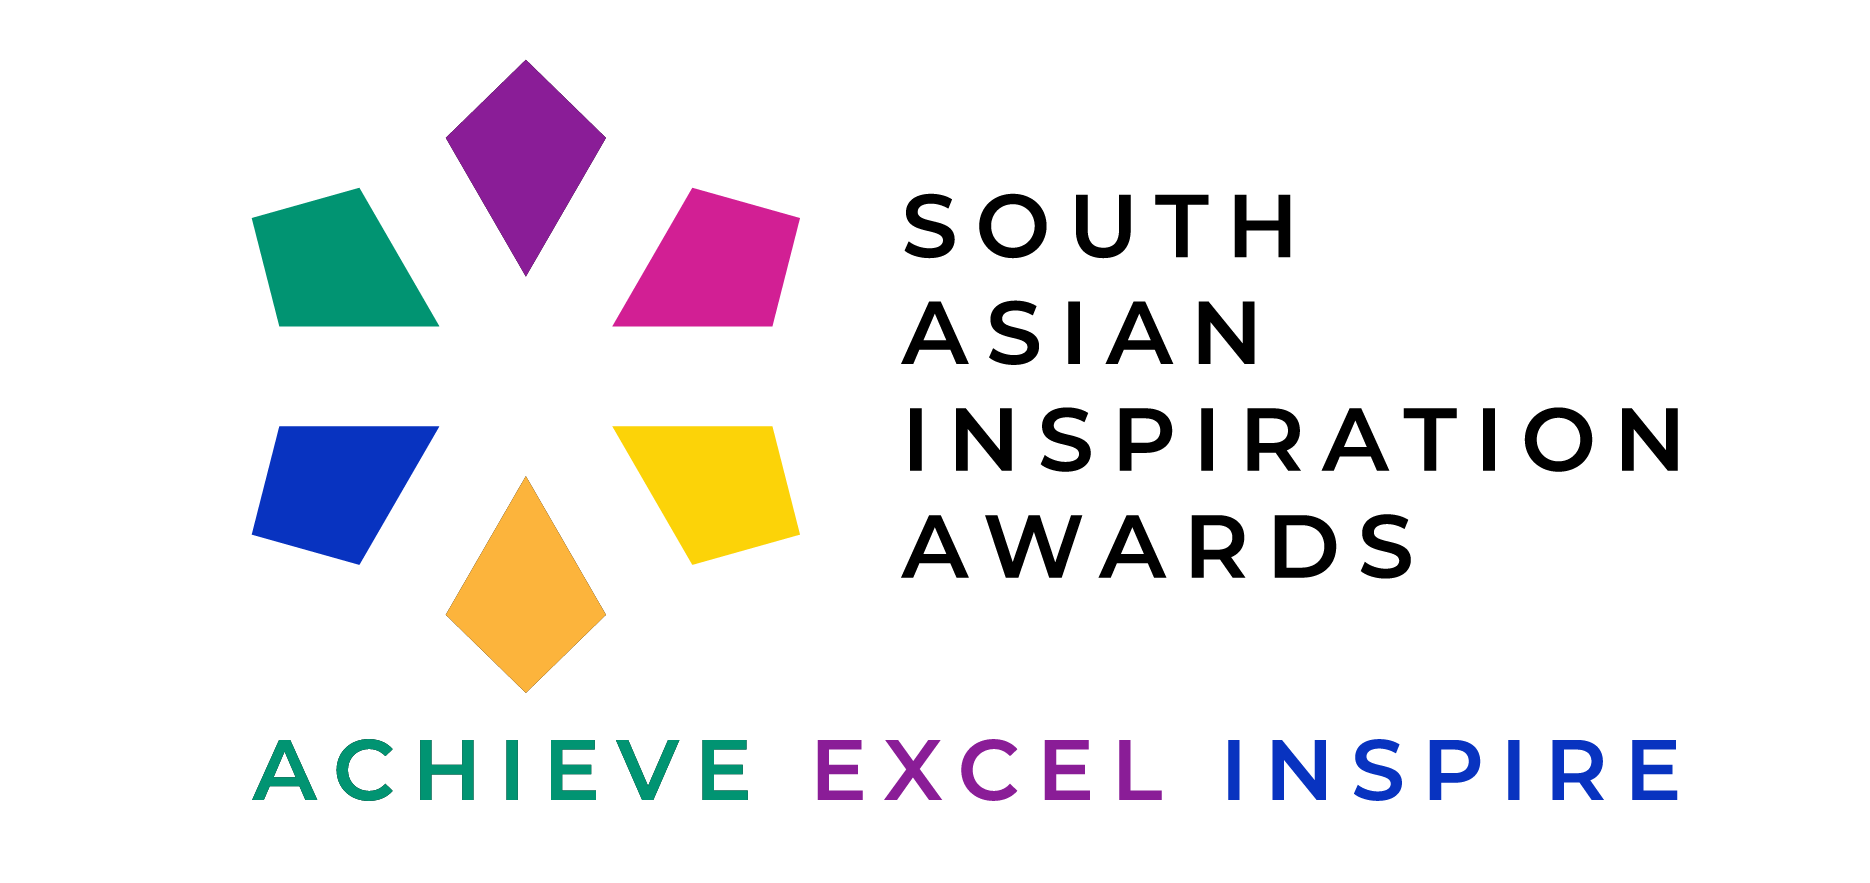 The South Asian inspiration Awards. The SAIA Awards will honour men, women and youth who are ordinary people with extraordinary lives/experiences from or impacting the South Asian community as role models and will use the gender-neutral positive platform of celebration to create a dialogue on gender equality/equity.